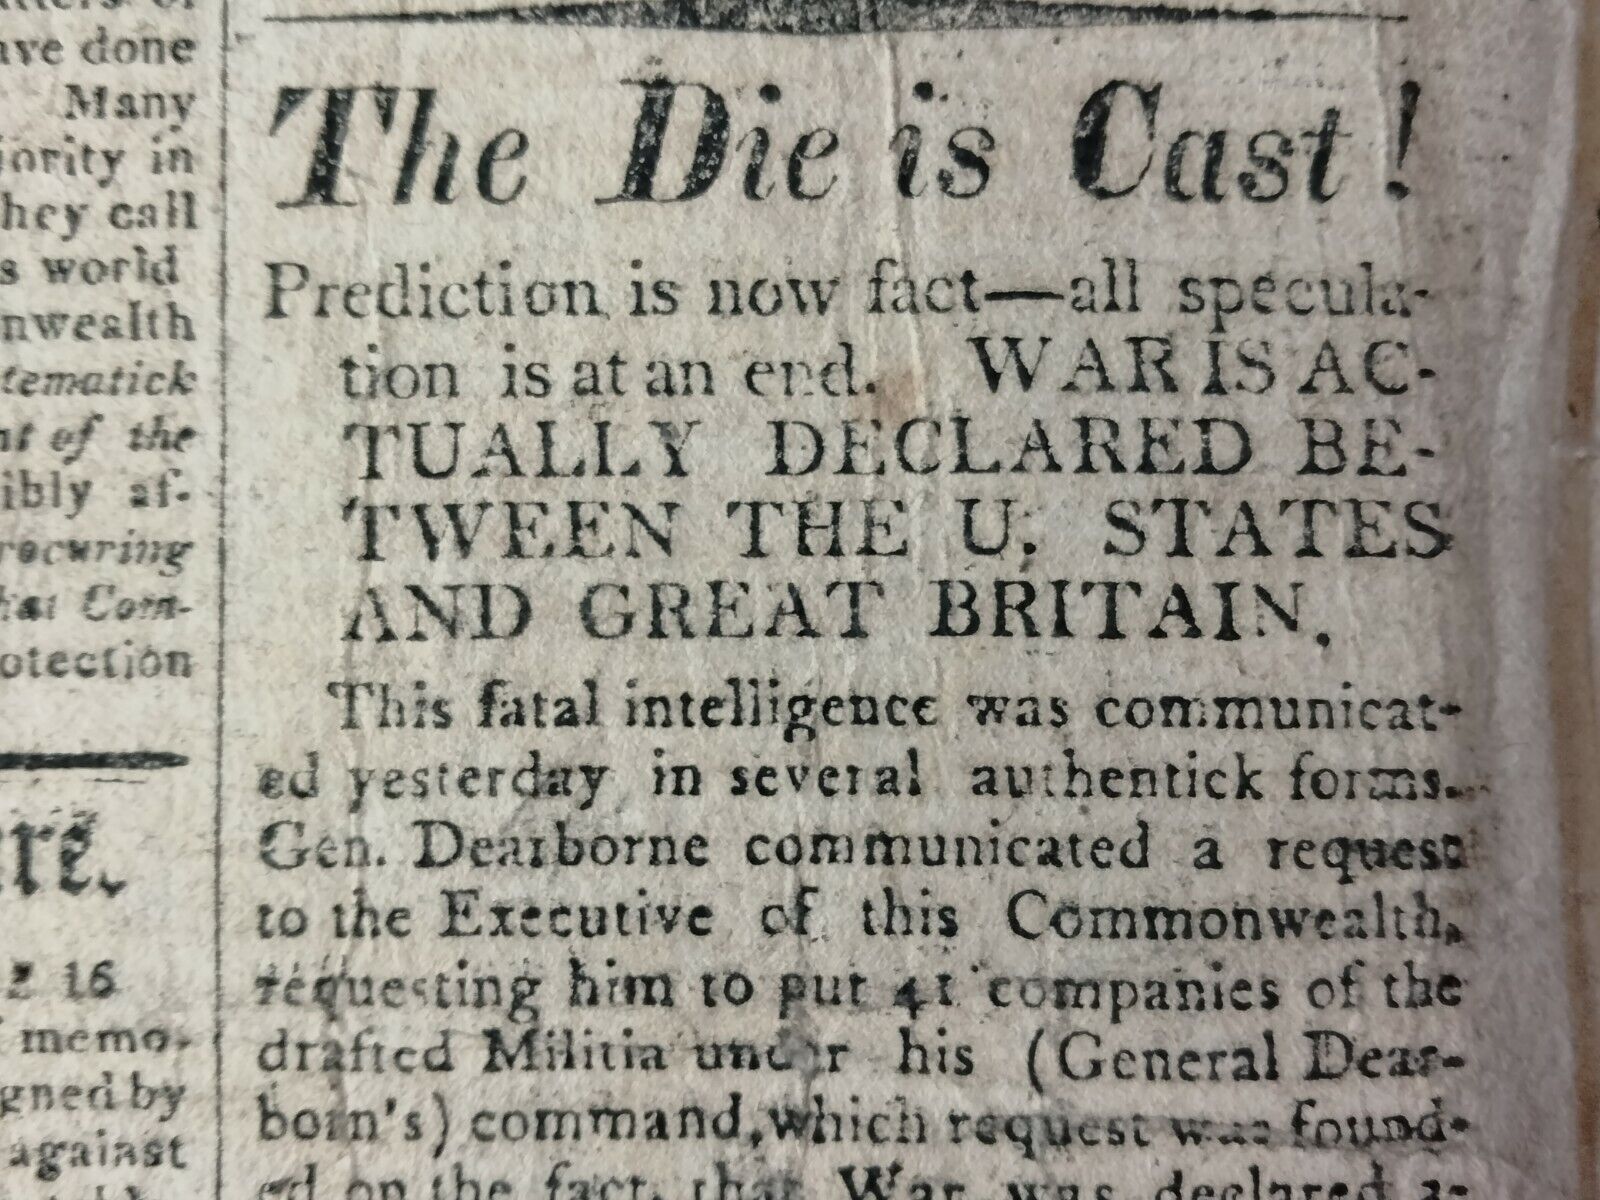 Newspapers-War of 1812-THE DIE IS CAST 1st NEWS, WAR DECLARED BY JAMES MADISON